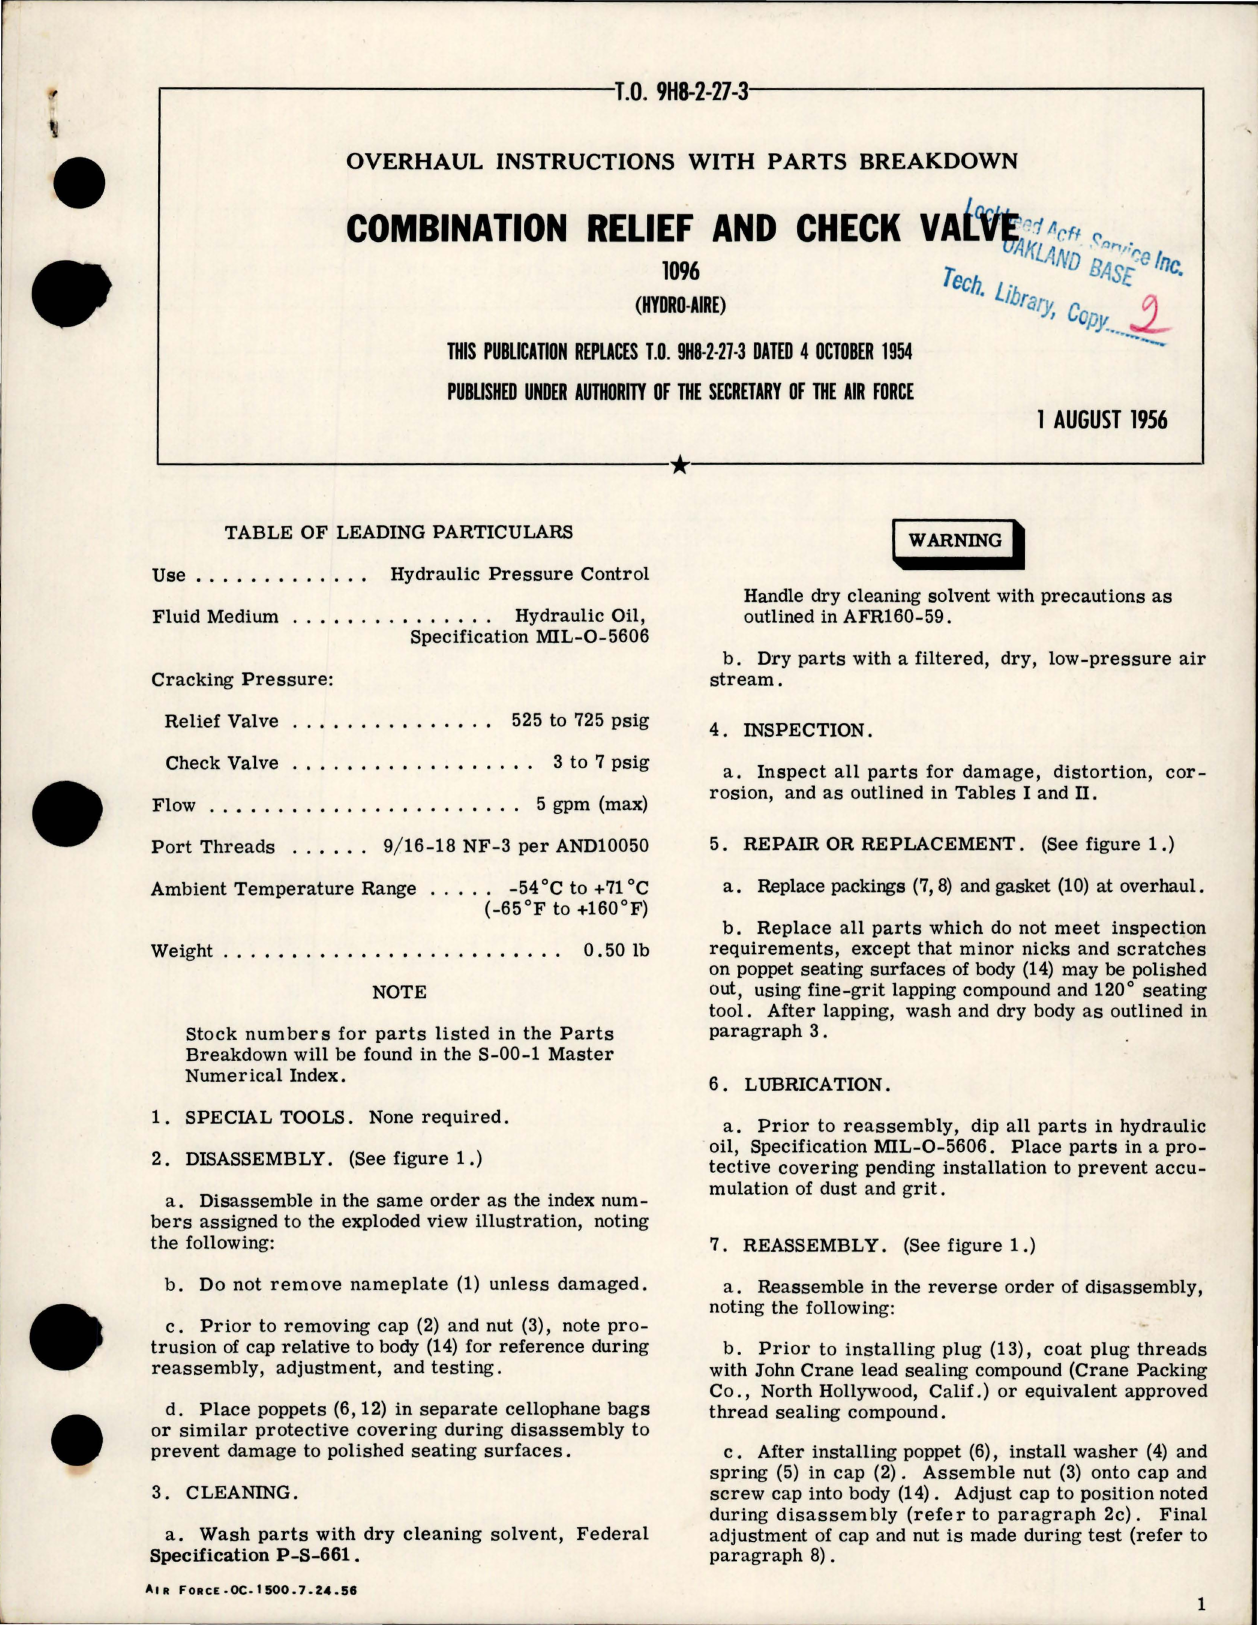 Sample page 1 from AirCorps Library document: Overhaul Instructions with Parts Breakdown for Combination Relief and Check Valve - 1096